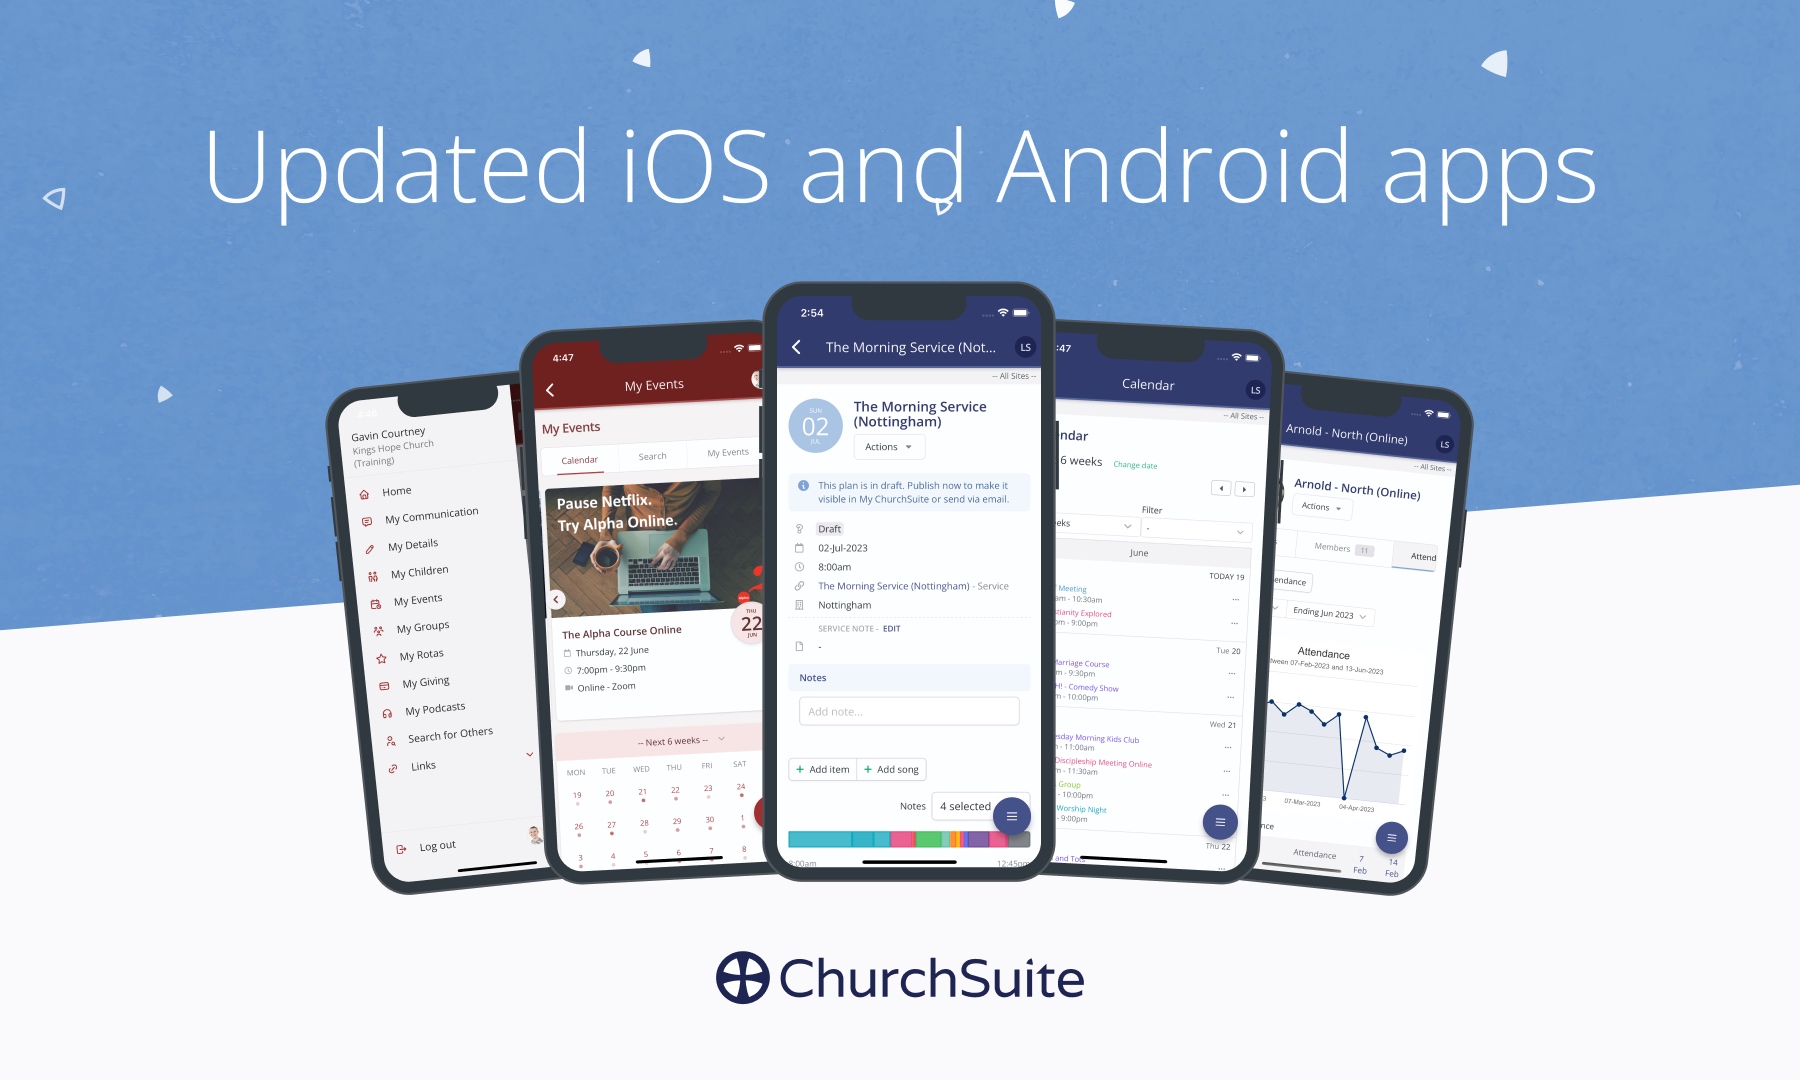 We launched our updated ChurchSuite iOS and Android apps